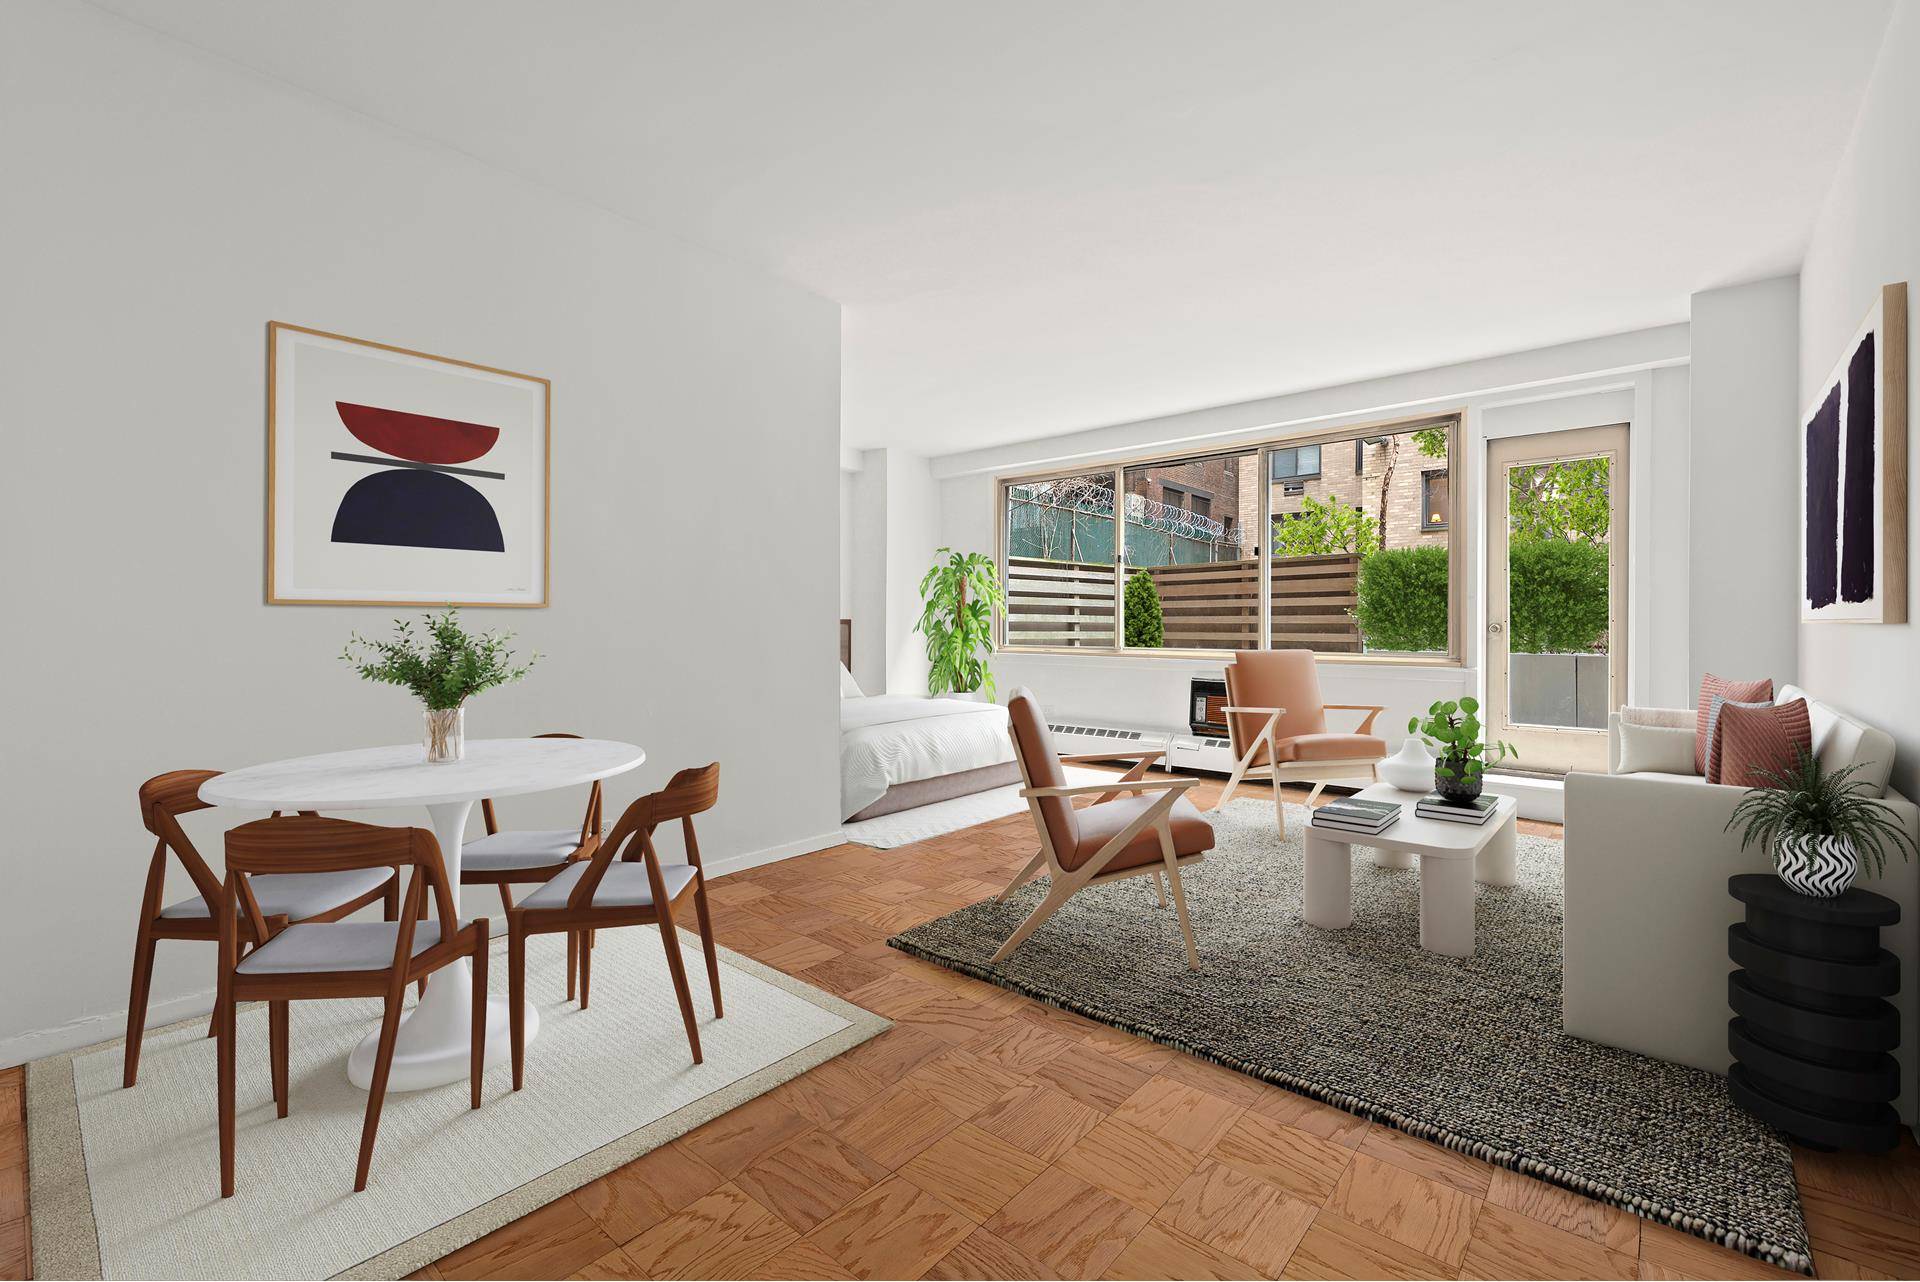 This very special Jr. 1 Bedroom L Studio features an enormous private patio with a tranquil southern exposure into the building's landscaped garden.